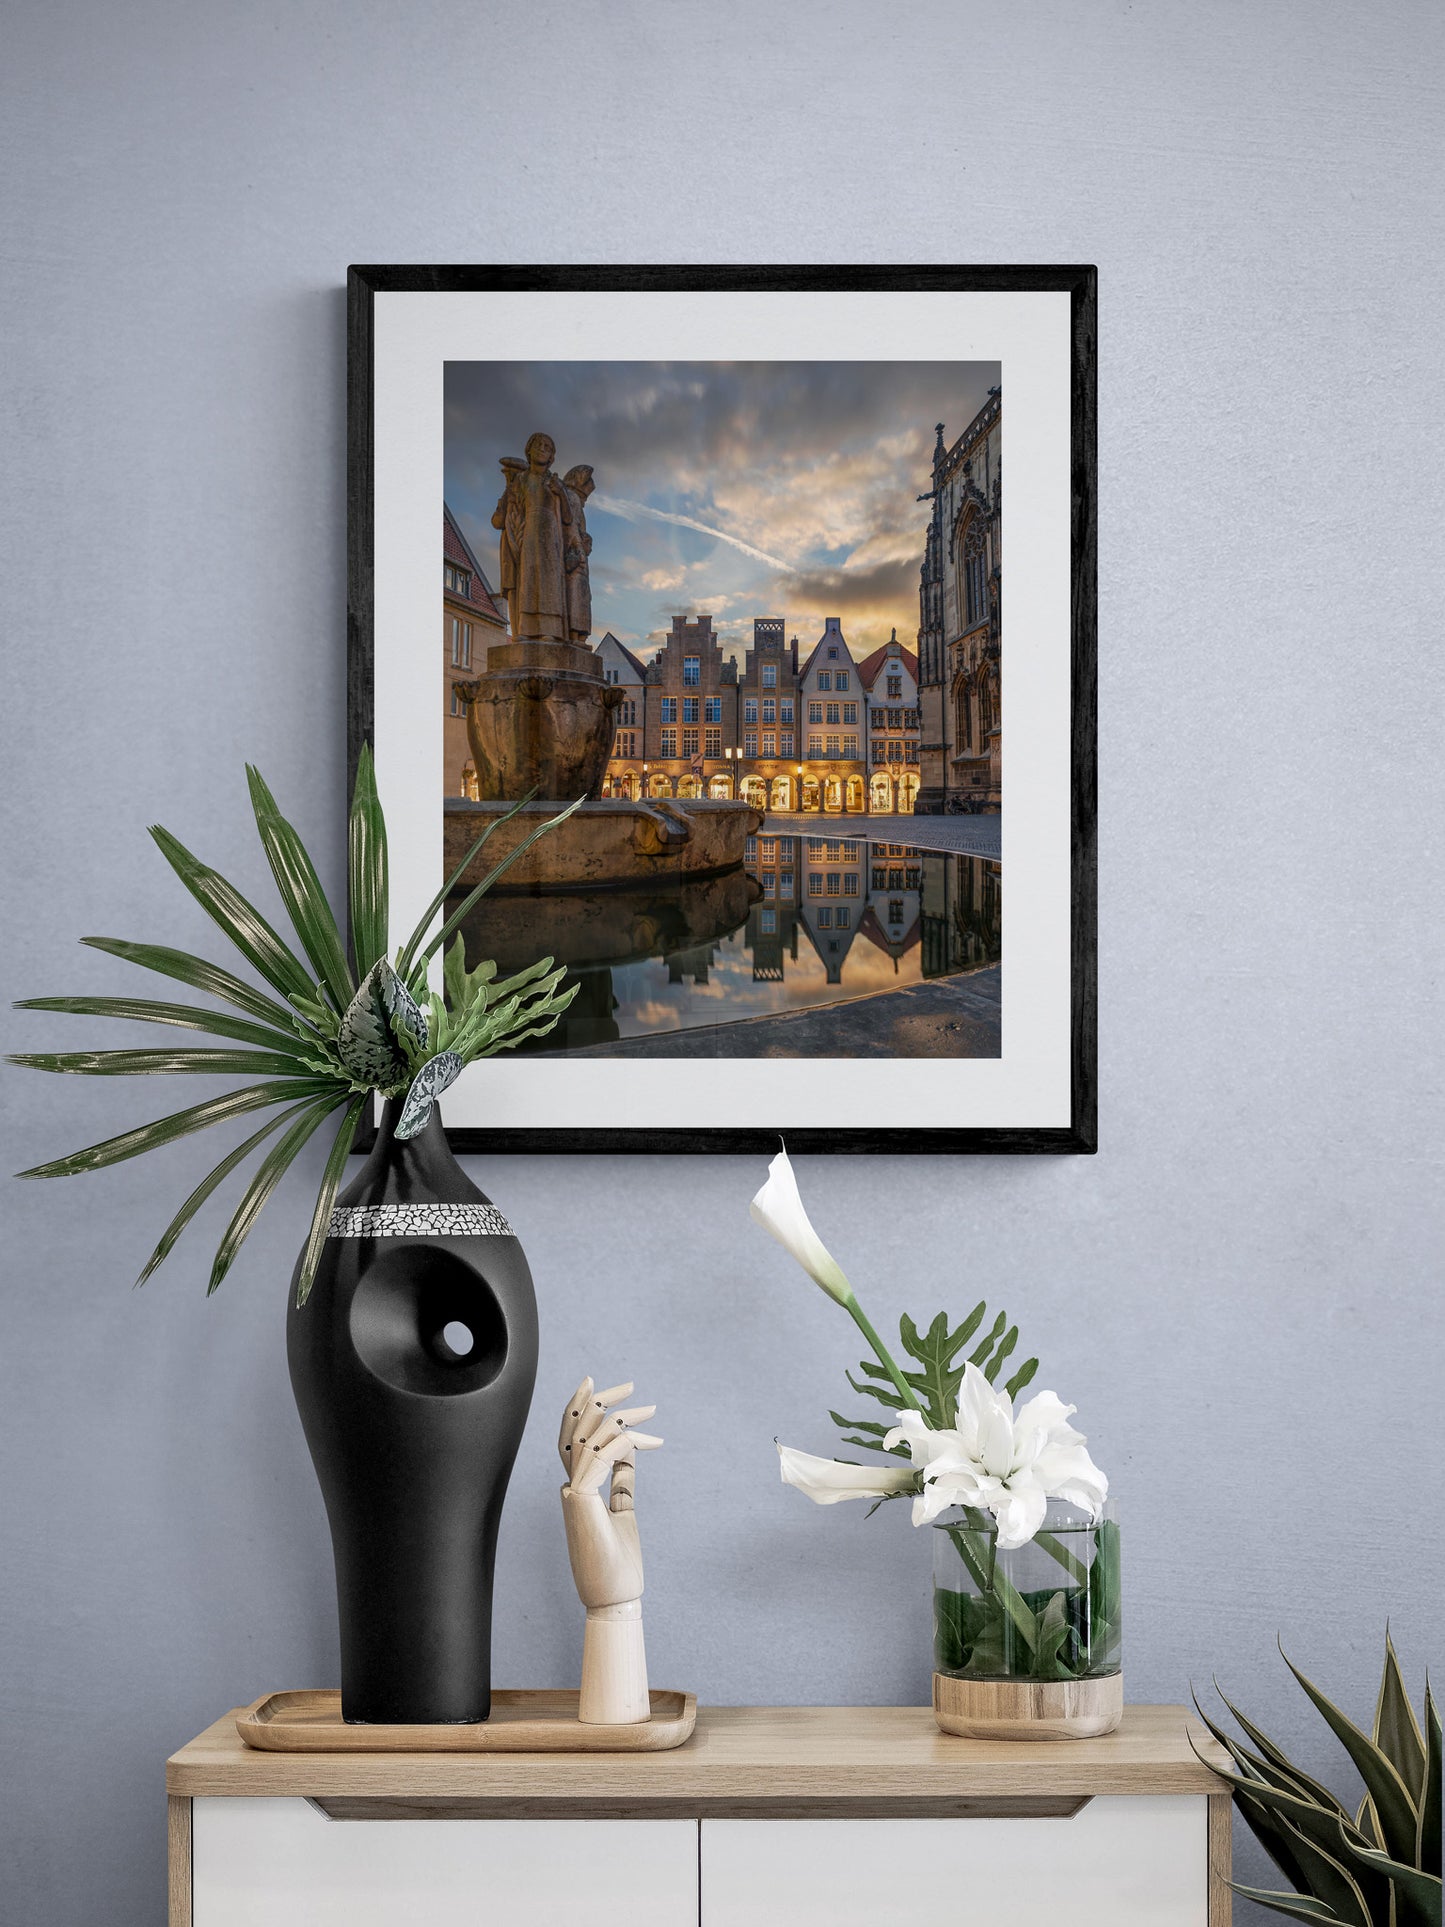 Image Title: Well, it's Münster!  Photographer: Marcus Danz Location: Münster, Germany Image description: Münster's ”Prinzipalmarkt“ is reflected in the water of a fountain during sunset. High quality Fine Art print up to 36 inch / around 90 centimeters on Hahnemühle paper available. Medium variant over sideboard.